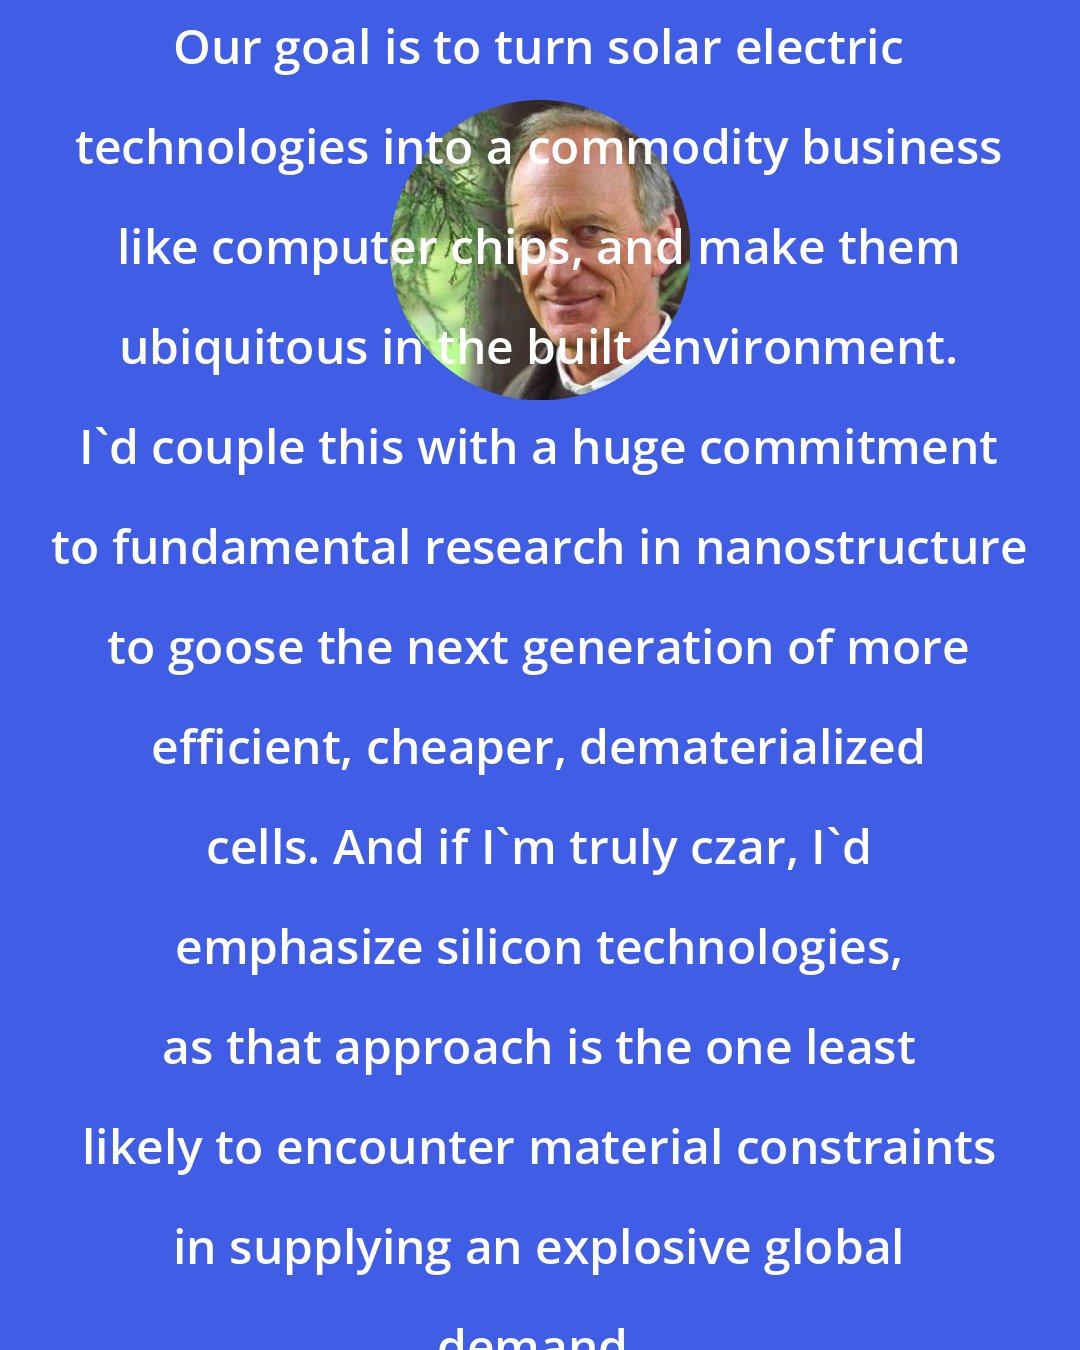 Denis Hayes: Our goal is to turn solar electric technologies into a commodity business like computer chips, and make them ubiquitous in the built environment. I'd couple this with a huge commitment to fundamental research in nanostructure to goose the next generation of more efficient, cheaper, dematerialized cells. And if I'm truly czar, I'd emphasize silicon technologies, as that approach is the one least likely to encounter material constraints in supplying an explosive global demand.